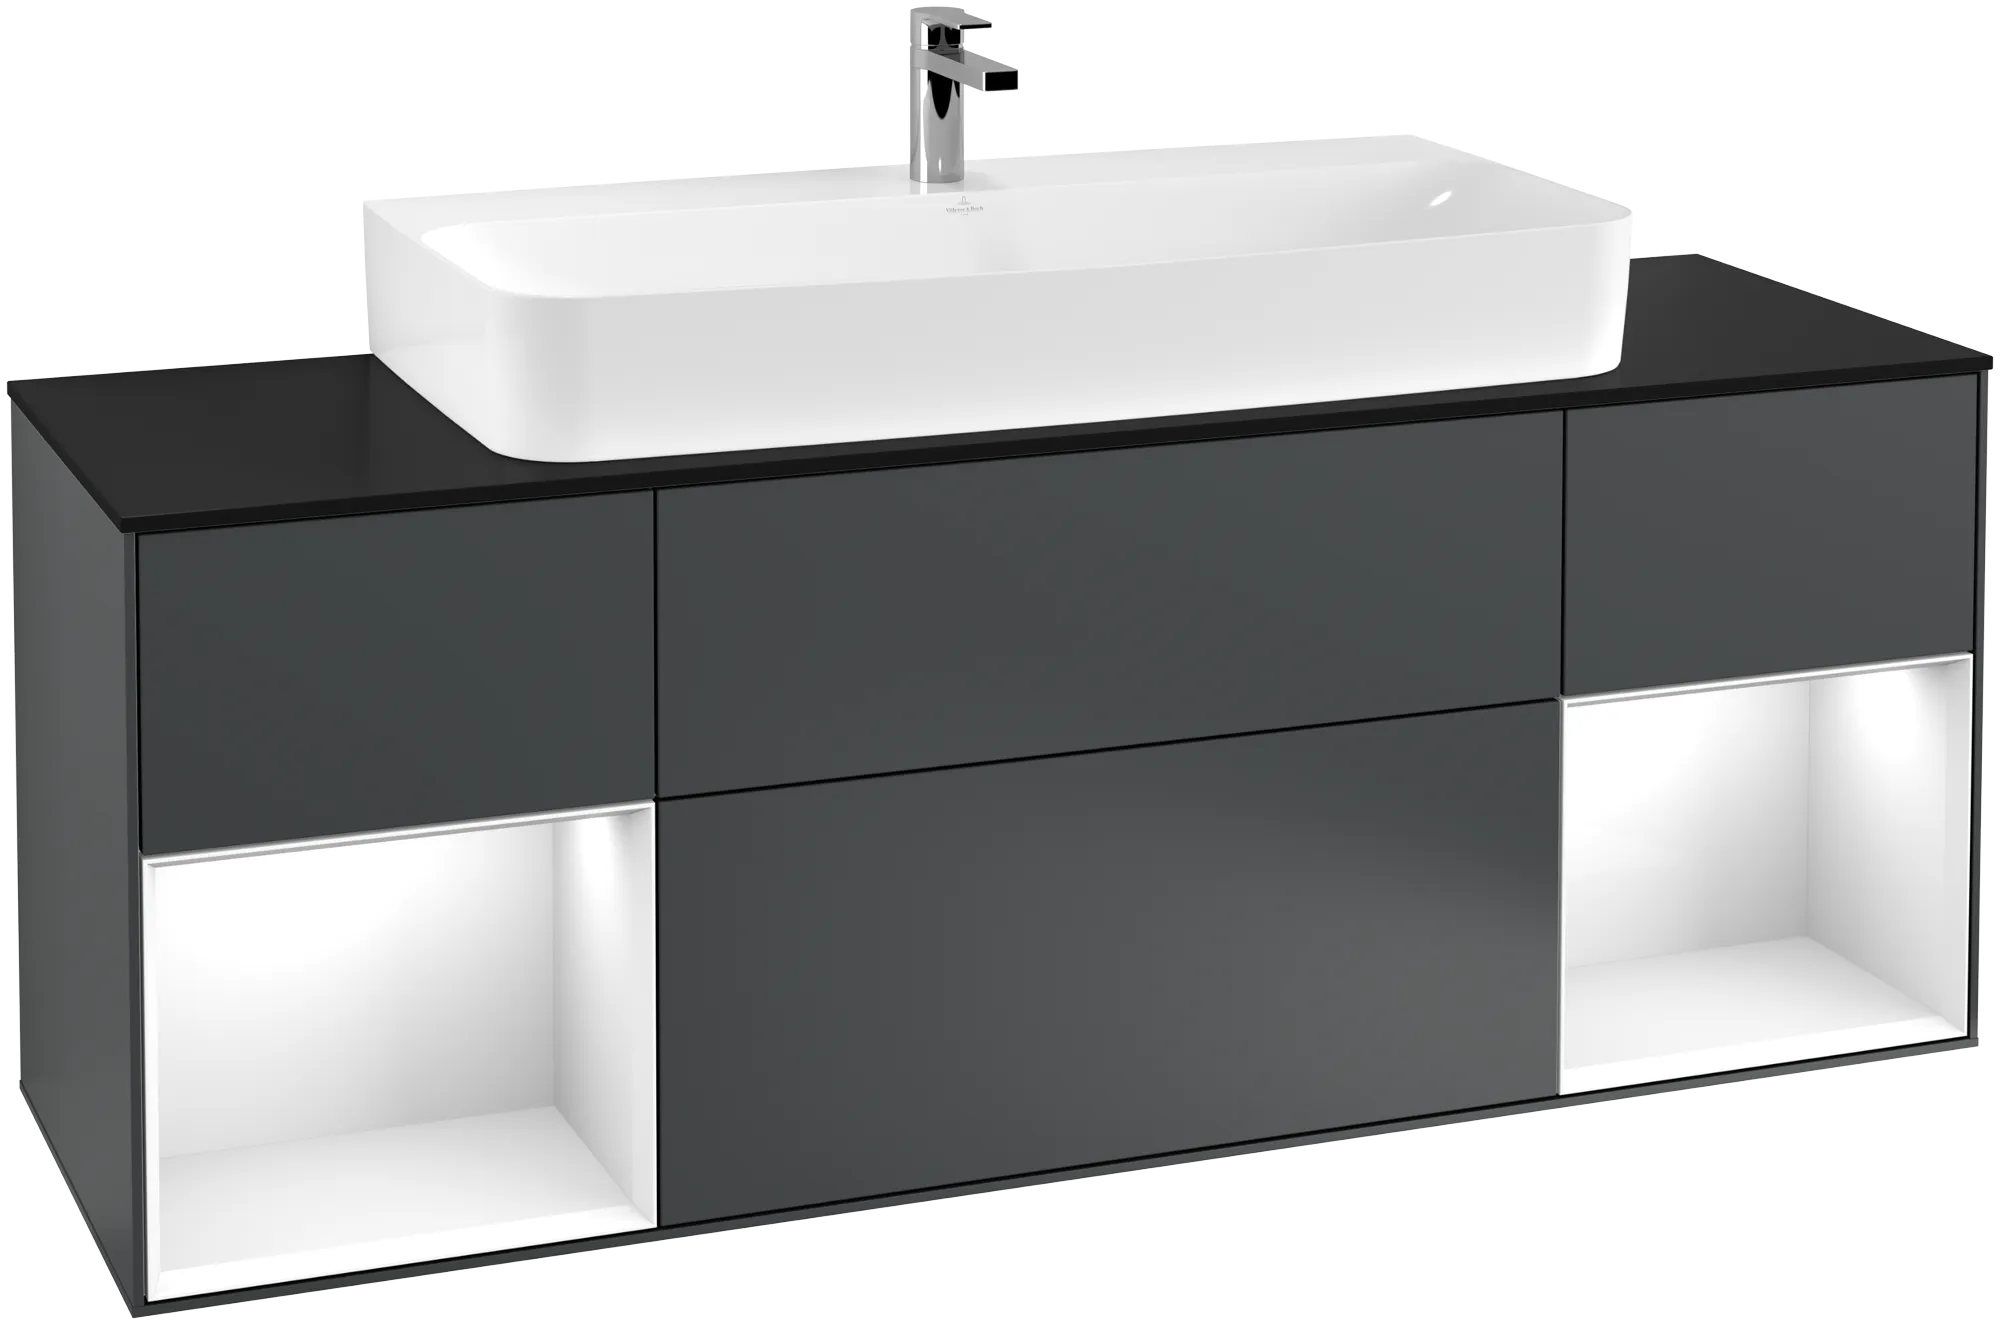 VILLEROY BOCH Finion Vanity unit, with lighting, 4 pull-out compartments, 1600 x 603 x 501 mm, Midnight Blue Matt Lacquer / Glossy White Lacquer / Glass Black Matt #G212GFHG resmi